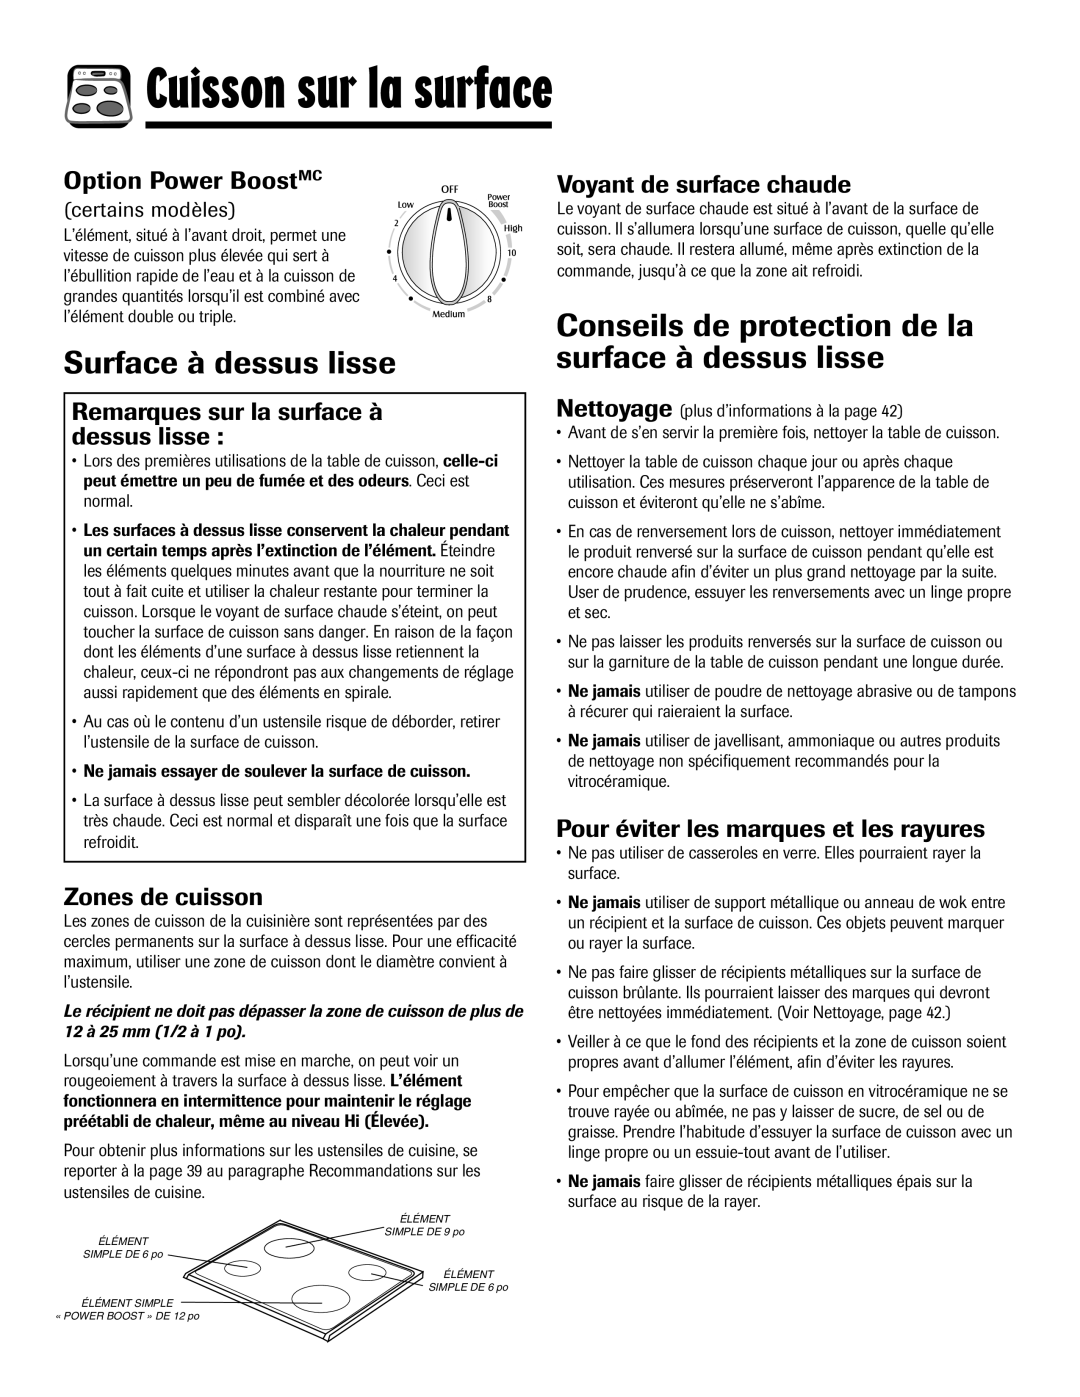 Maytag 8113P768-60 manual Surface à dessus lisse, Conseils de protection de la surface à dessus lisse, Option Power BoostMC 